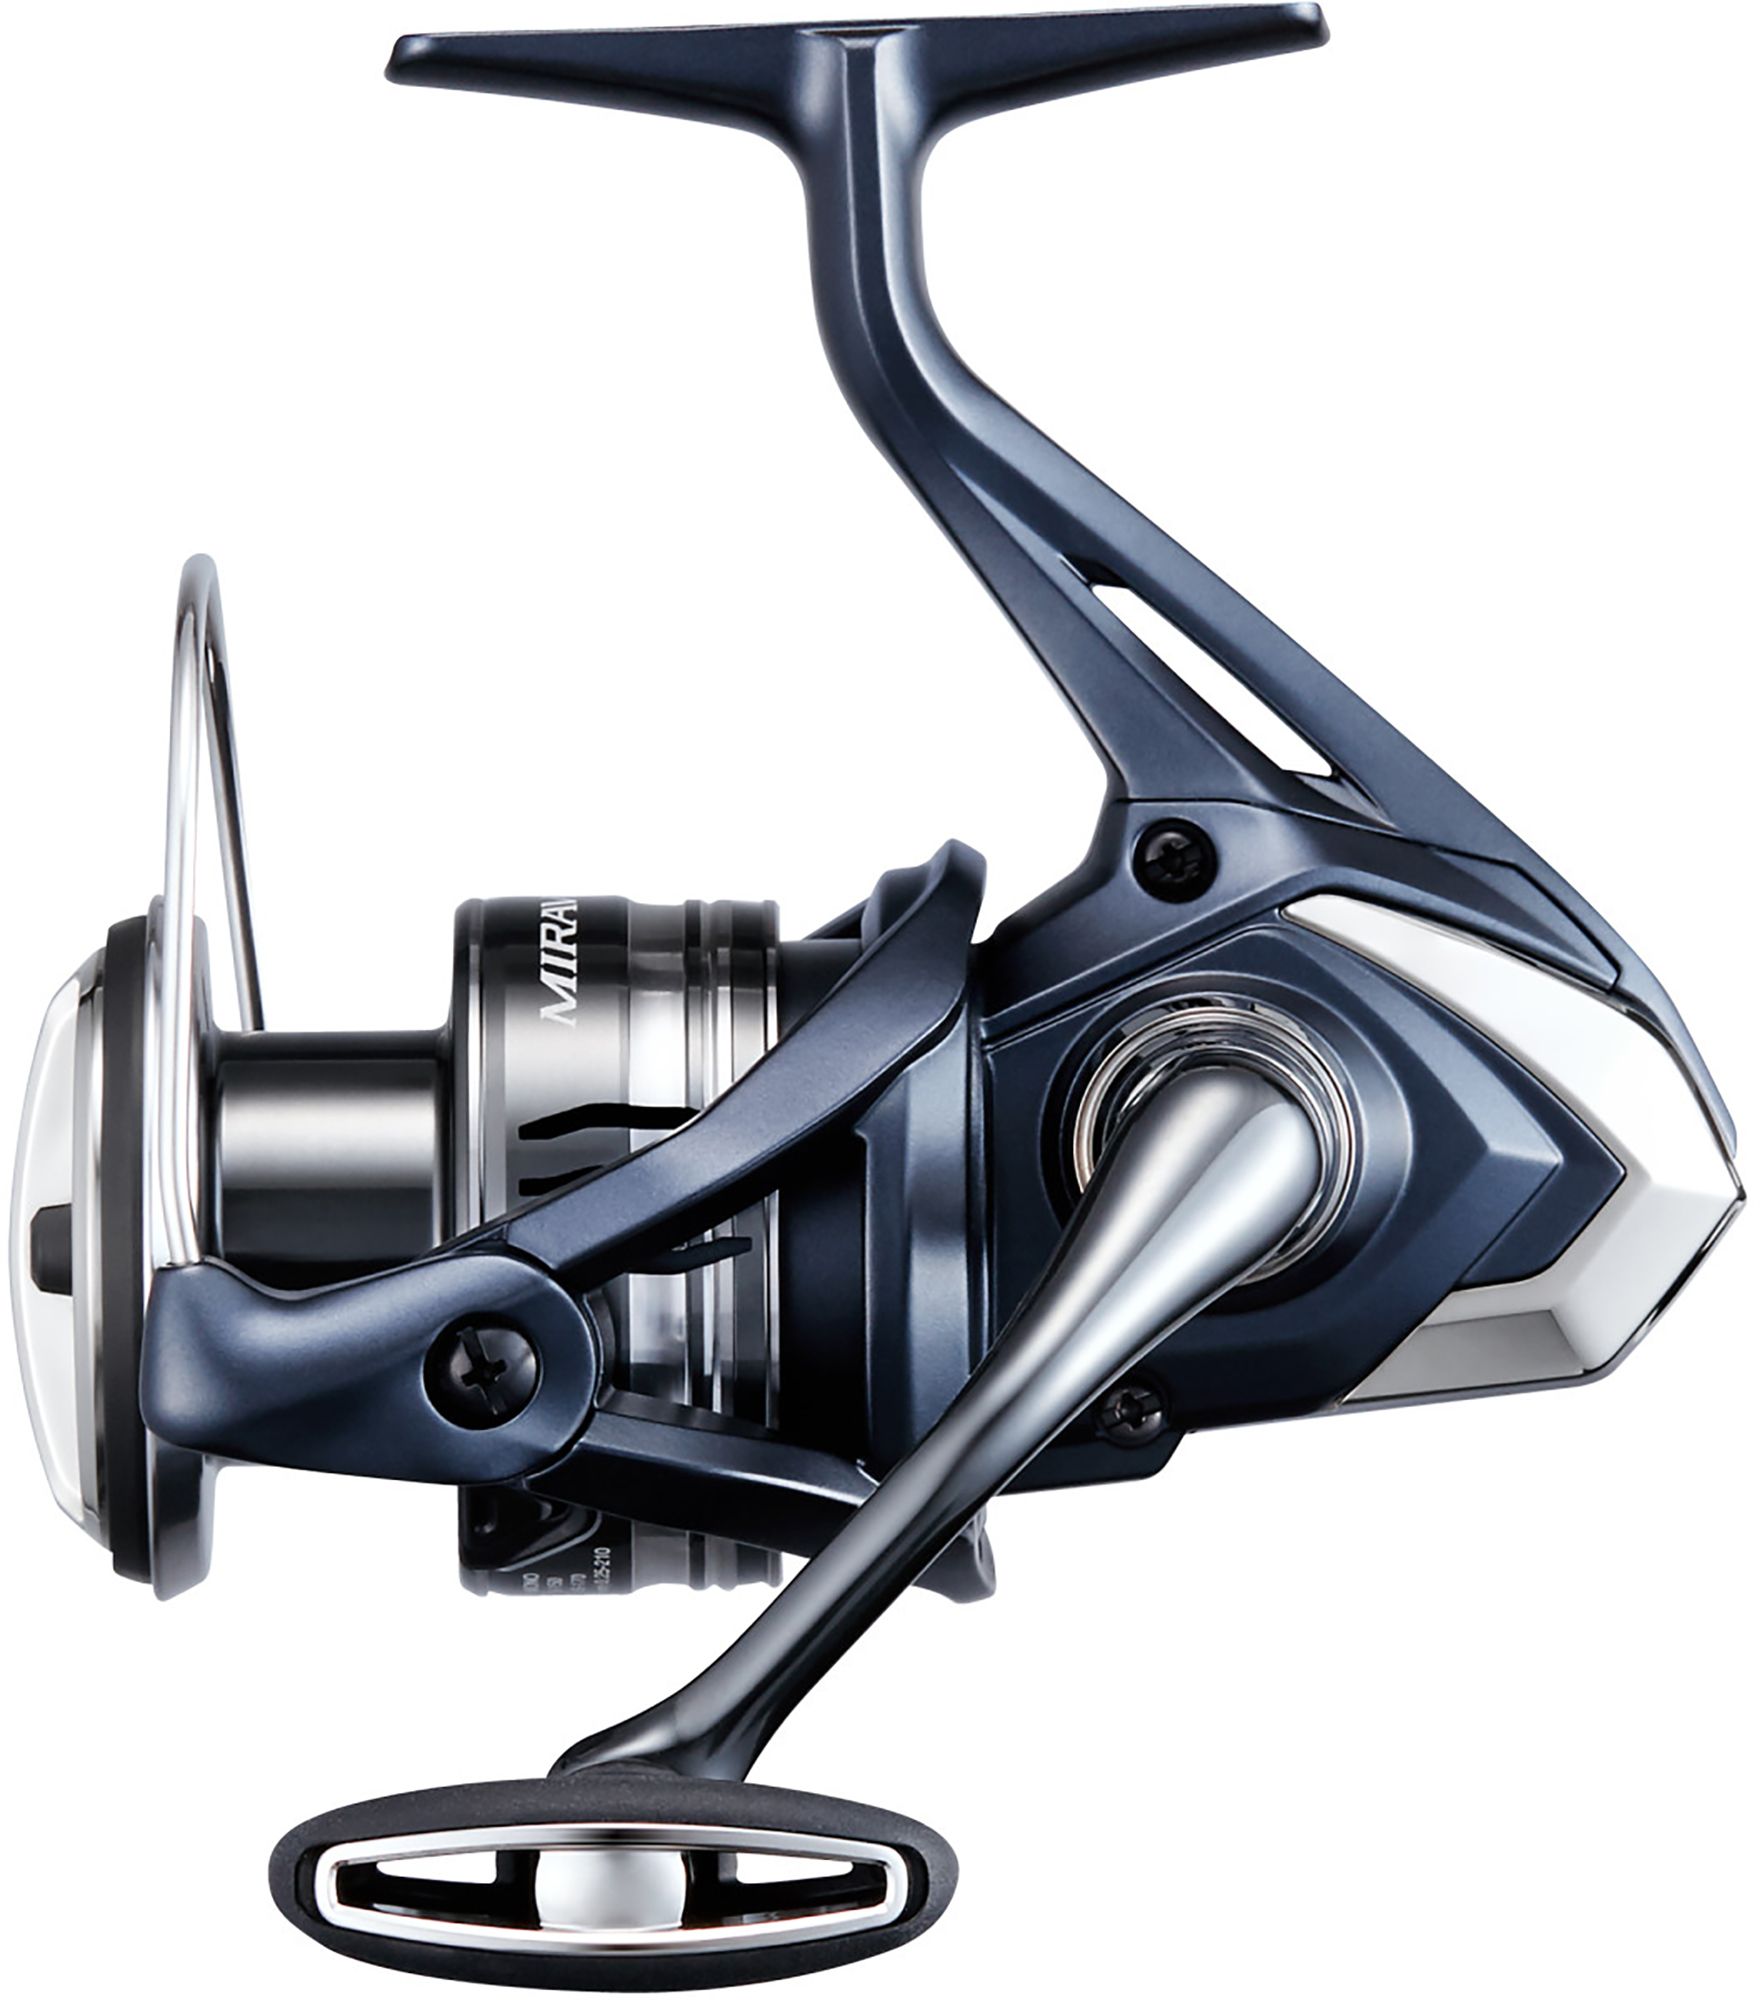 Photos - Other for Fishing Shimano Miravel Spinning Reel 22SHMUMRVLC3000HGREEX 